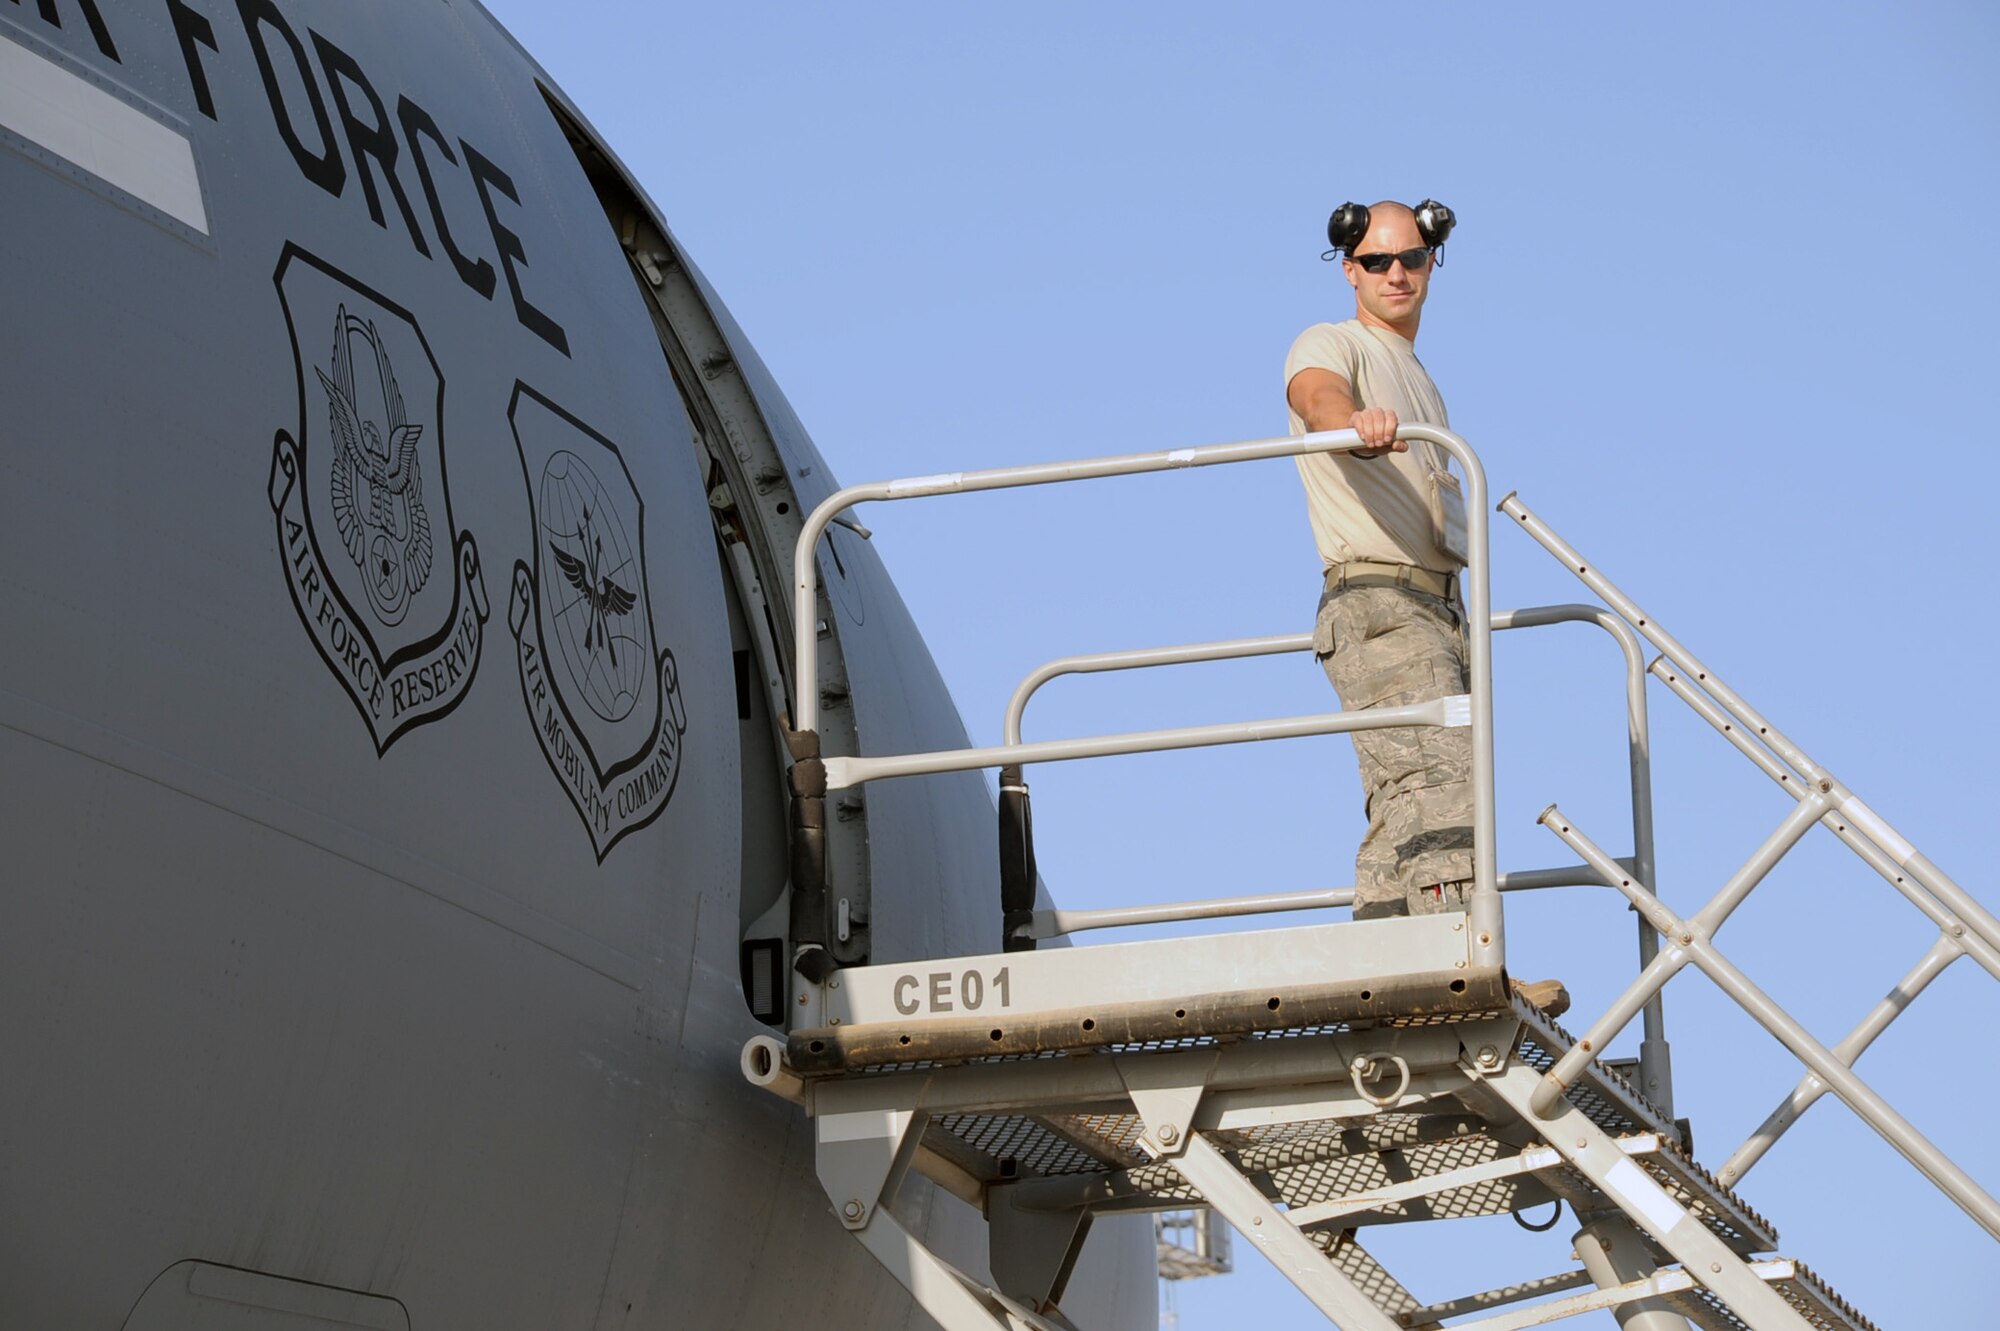 Staff Sgt. Grant Ciccone, a KC-10 Extender crew chief with the 380th Aircraft Maintenance Squadron deployed from the 605th AMXS of Joint Base McGuire-Dix-Lakehurst, N.J., stands atop air stairs in between his work in preparing a KC-10 for a mission during operations on the flightline at a nin-disclosed base in Southwest Asia on Jan. 22, 2009. KC-10s at this deployed location, assigned to the 908th Expeditionary Air Refueling Squadron with some also deployed from Joint Base M-D-L, are one of Air Mobility Command's air refueling aircraft deployed to the U.S. Central Command area of responsibility that provides the "global reach" for Air Force and Department of Defense aircraft through air refueling operations for Operations Iraqi Freedom and Enduring Freedom and the Combined Joint Task Force-Horn of Africa. (U.S. Air Force Photo/Tech. Sgt. Scott T. Sturkol/Released)